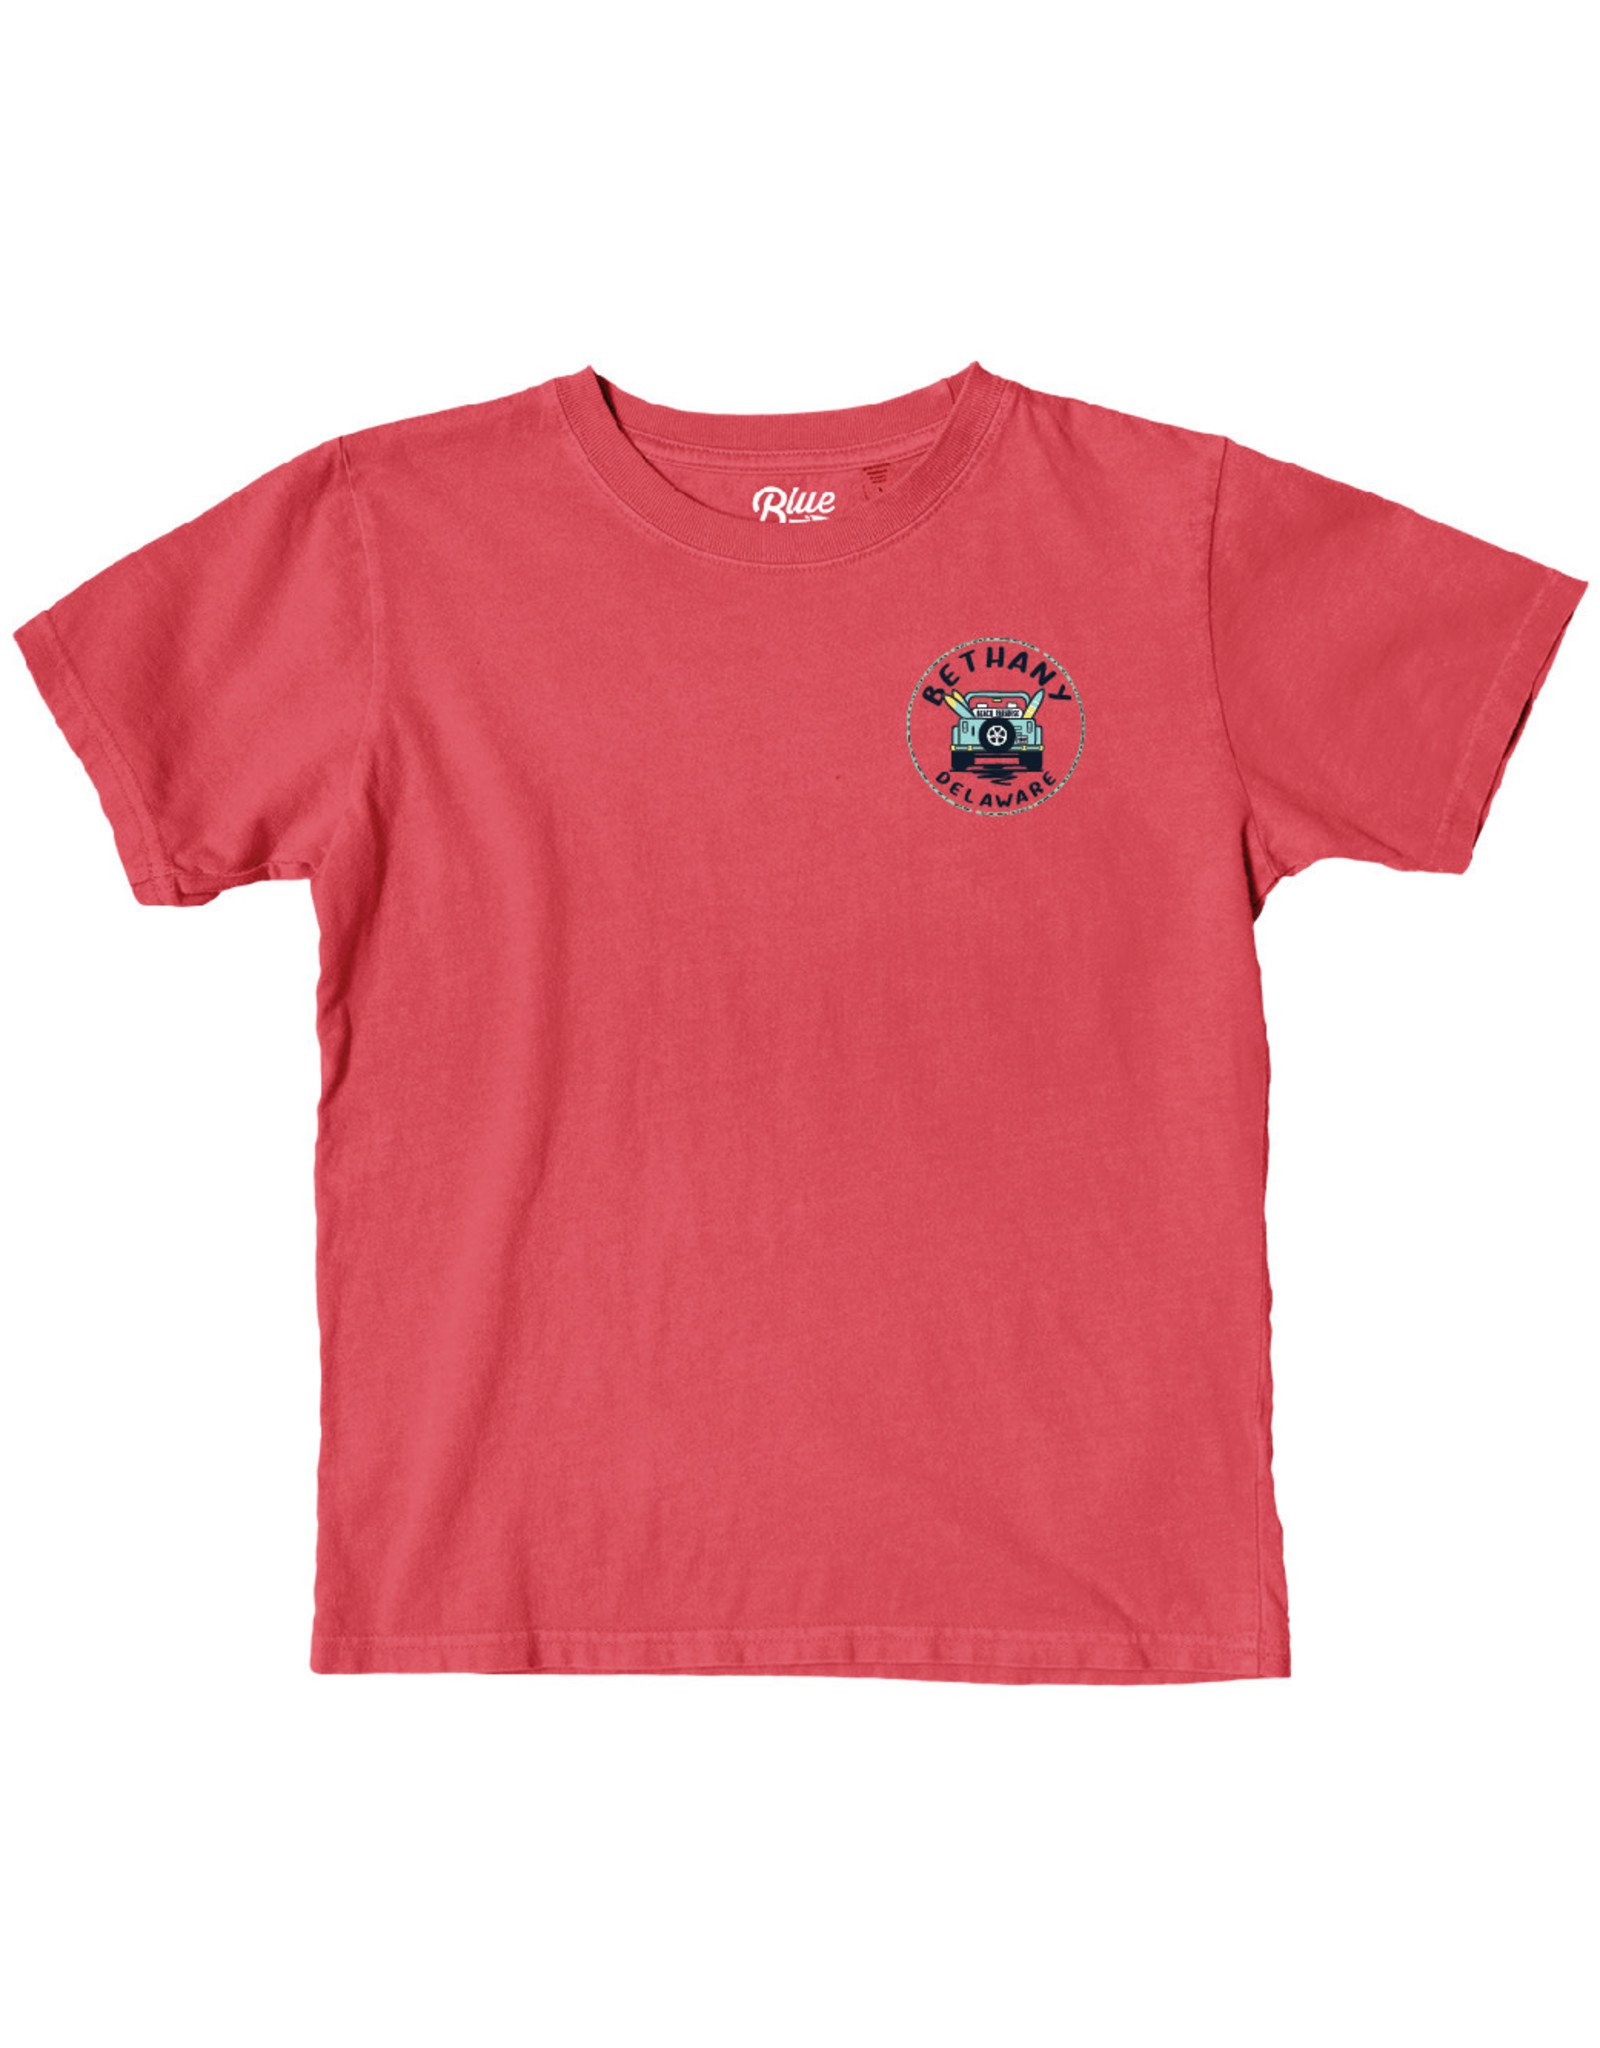 BLUE 84 BETHANY CONCURRENCE JEEP YOUTH SS TEE